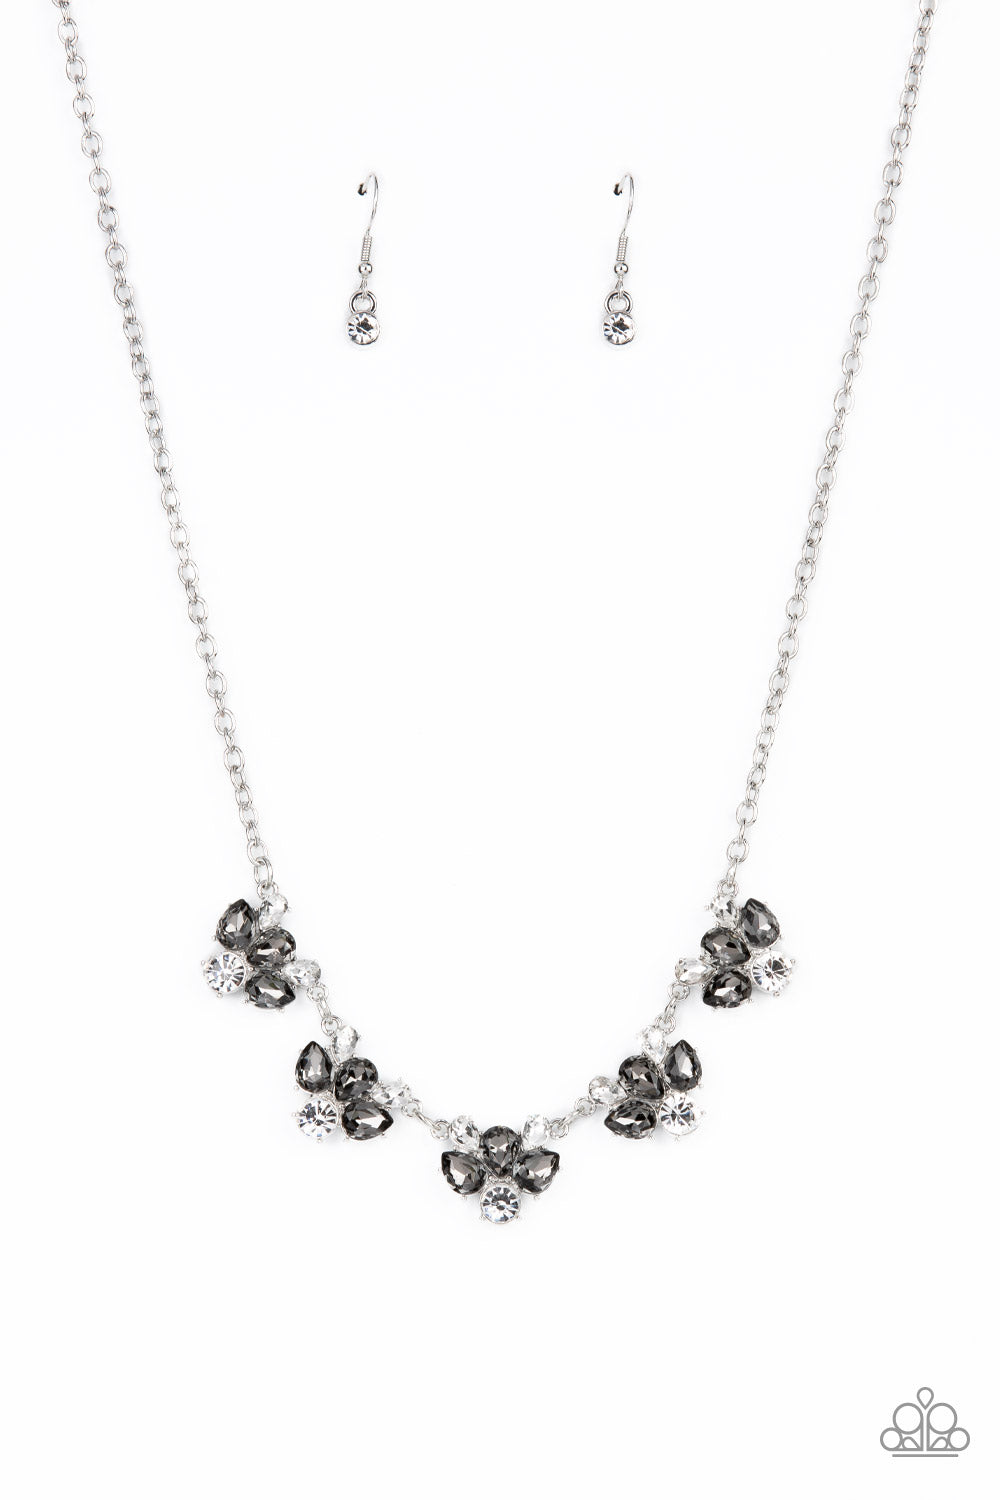 Envious Elegance Silver Necklace - Paparazzi Accessories  Featuring round and teardrop cuts, white and smoky rhinestones delicately link into a sparkling statement piece that results into an envious glow below the collar. Features an adjustable clasp closure.  Sold as one individual necklace. Includes one pair of matching earrings.